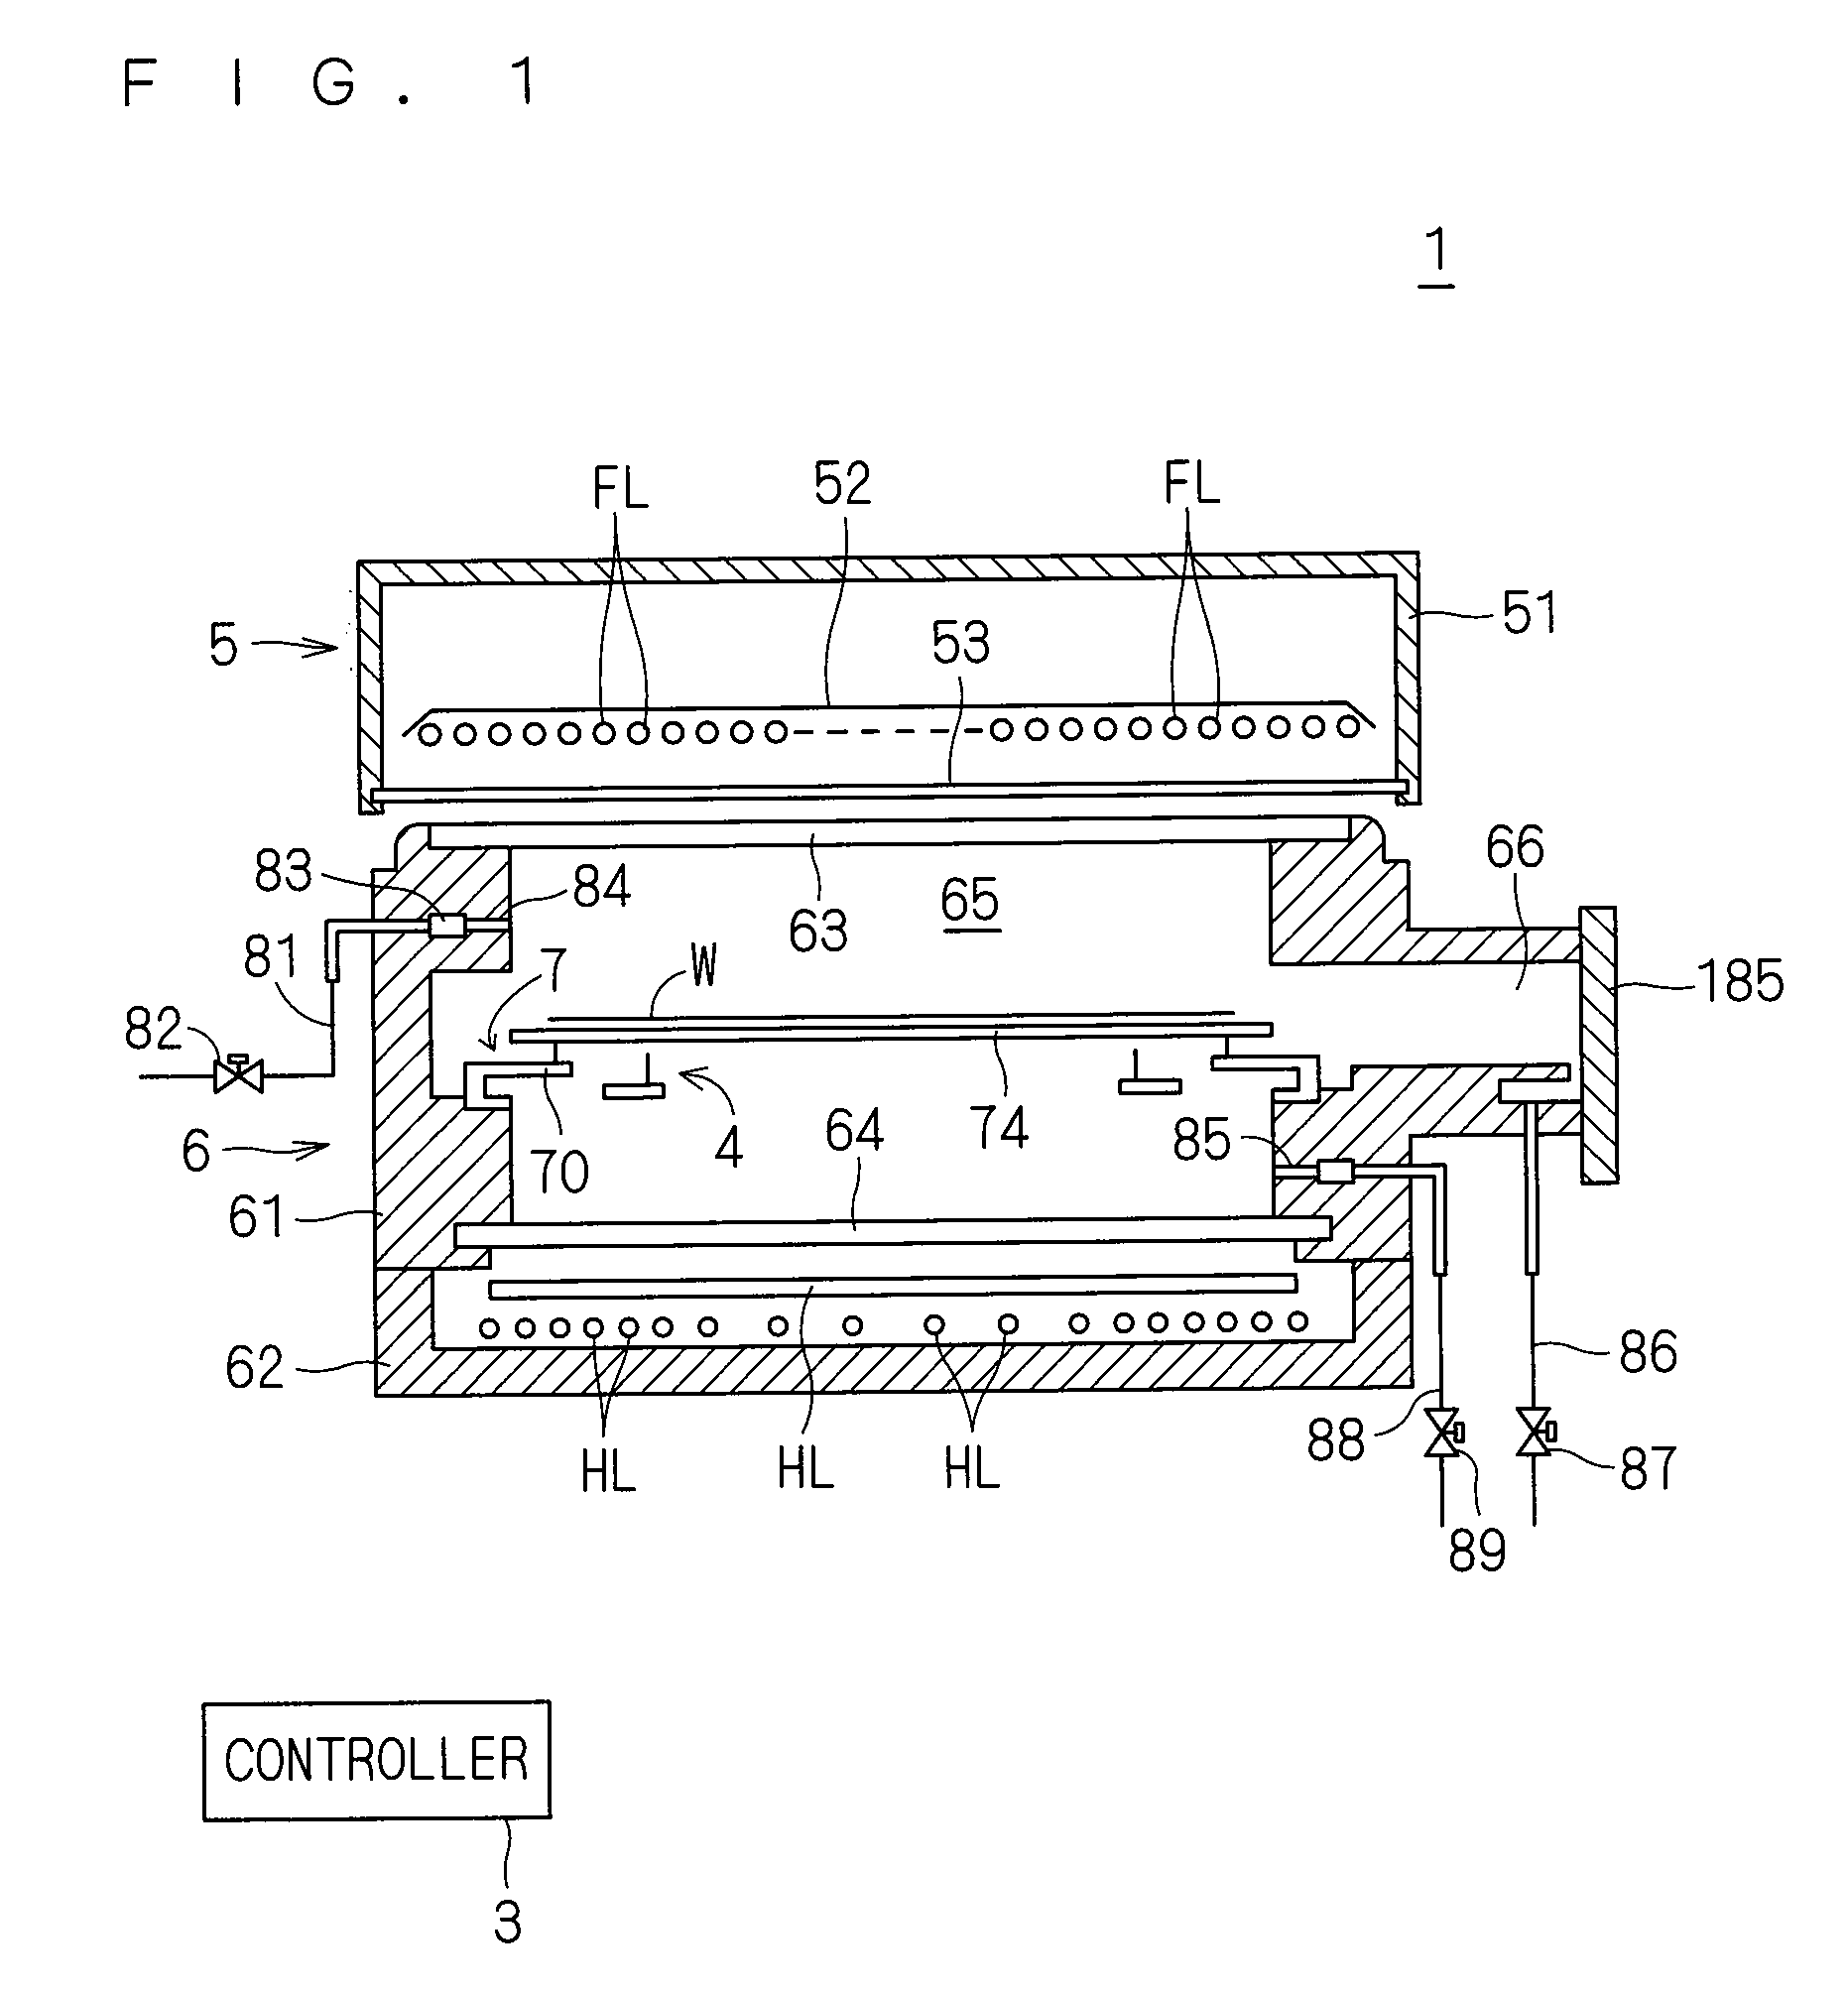 Heat treatment apparatus for heating substrate by exposing substrate to flash light